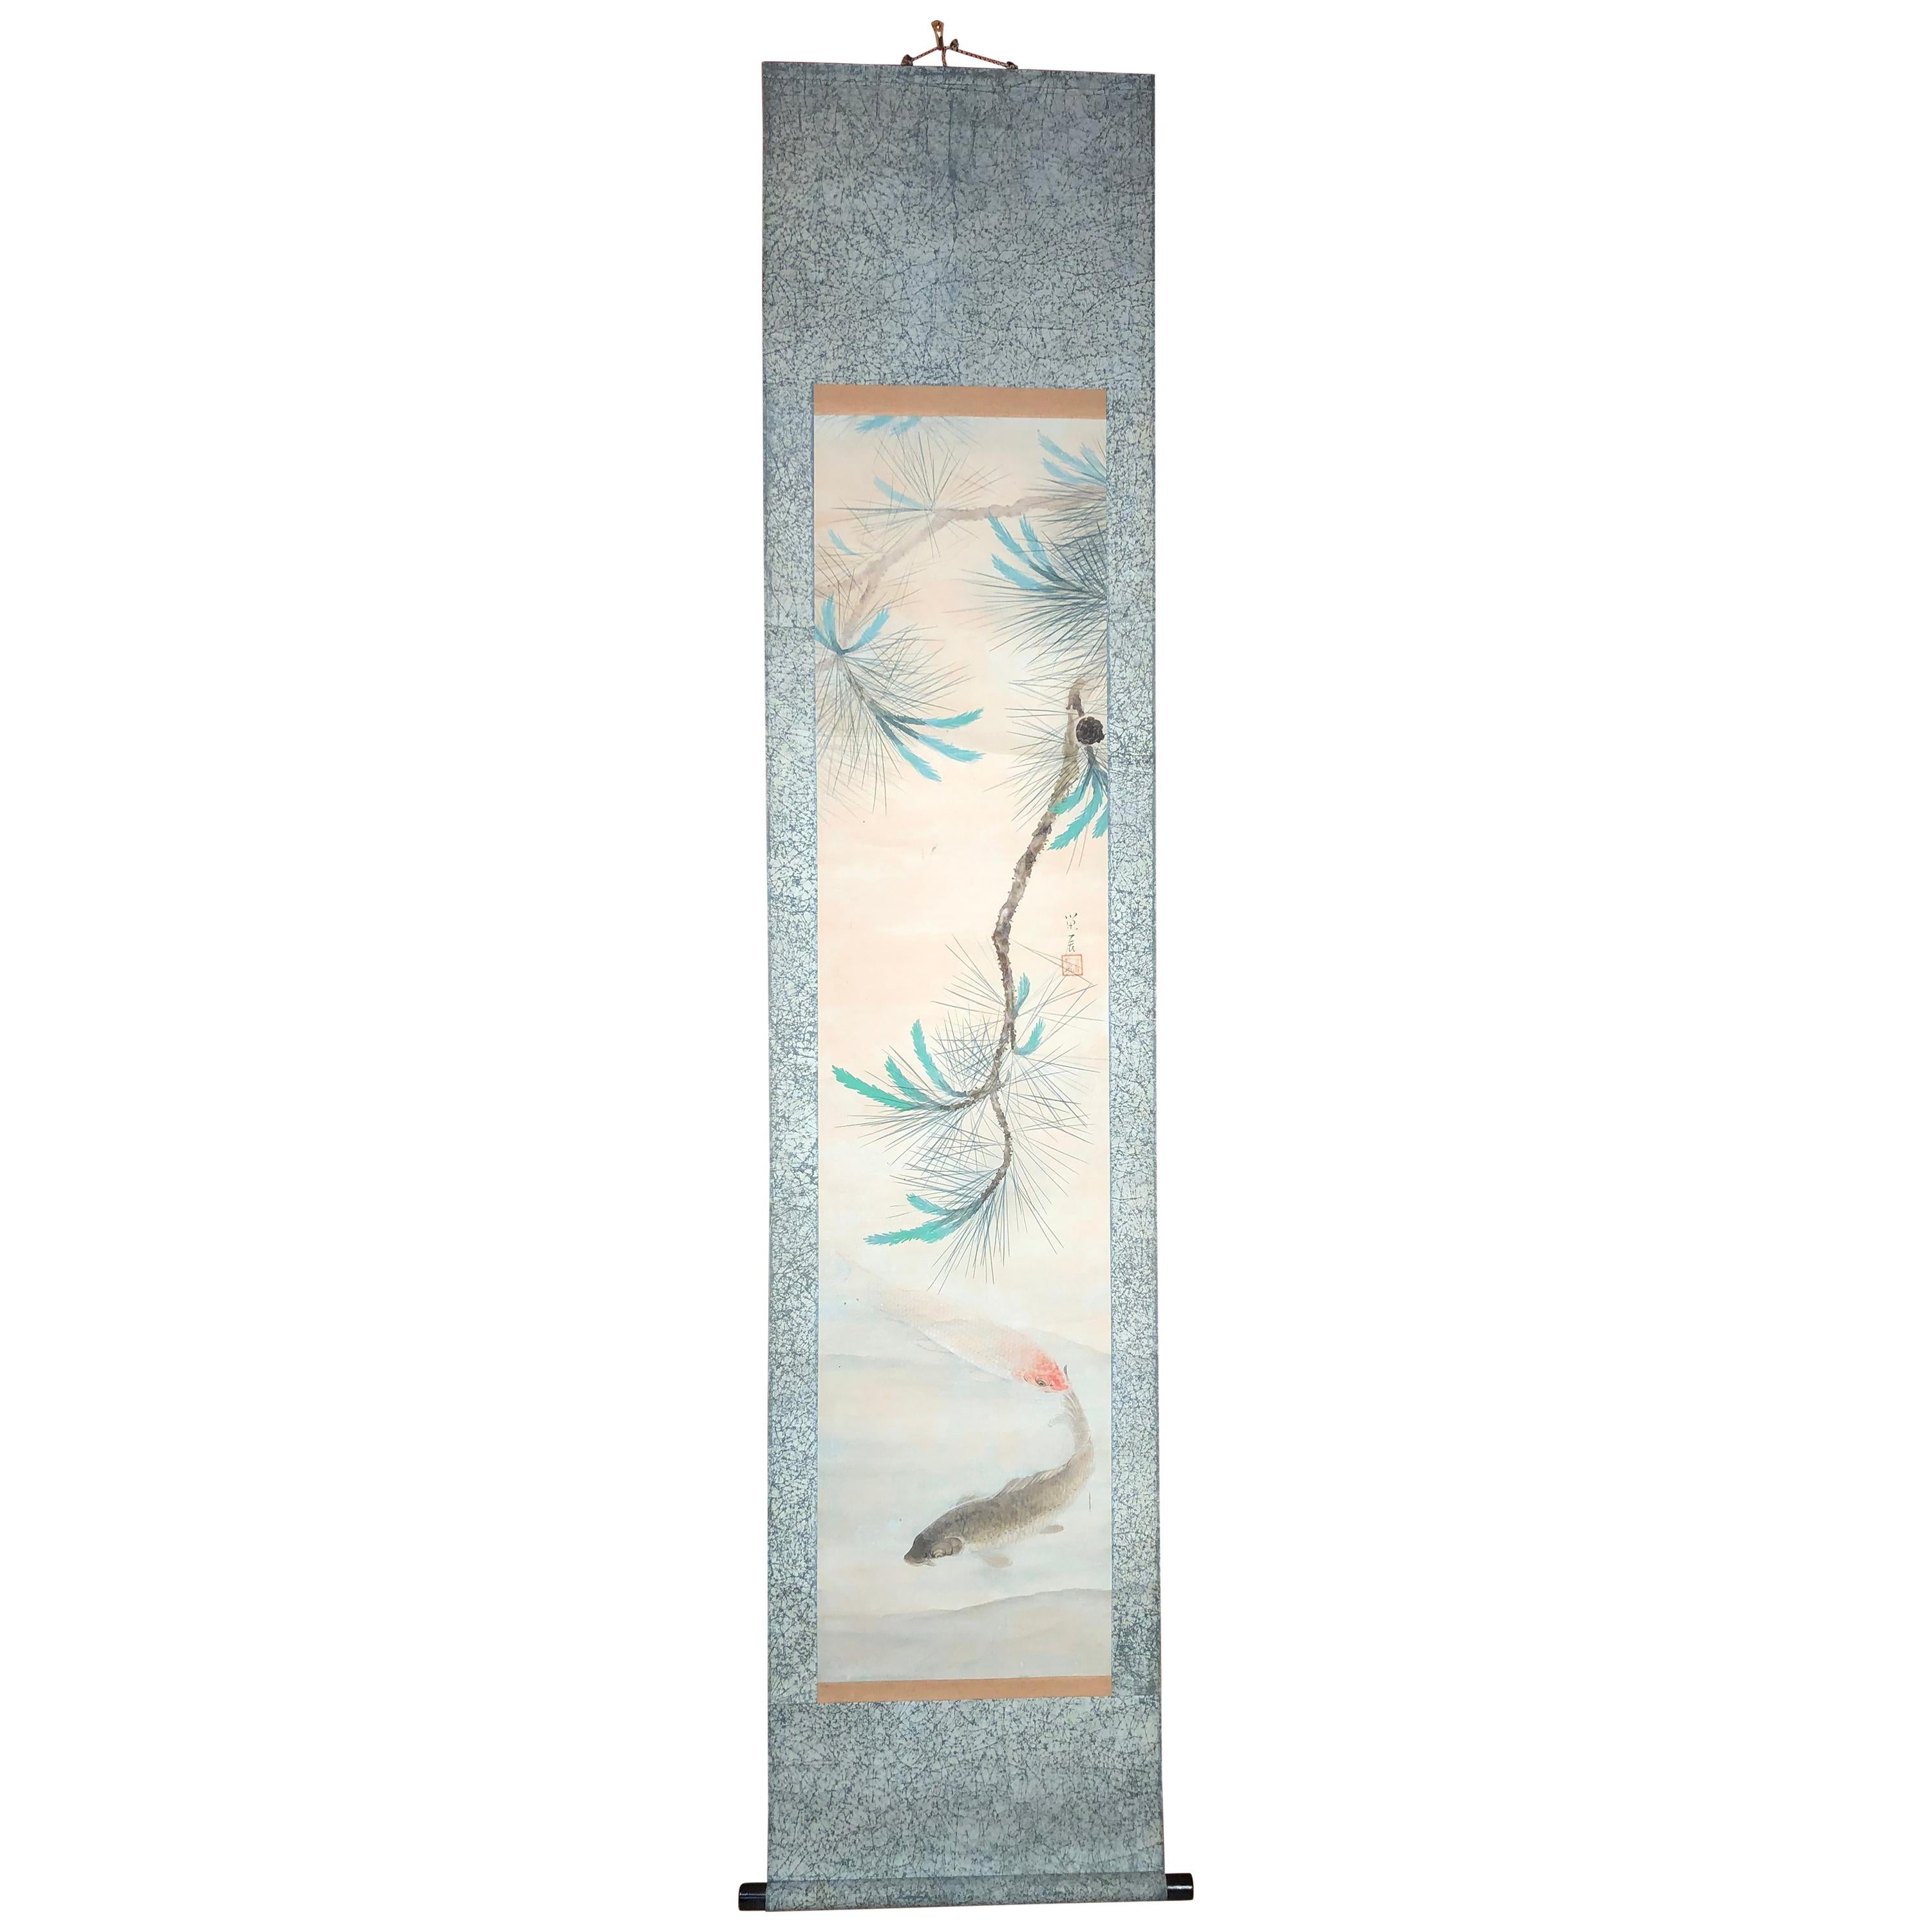 Japanese Hand Painted Scroll Family Koi Fish